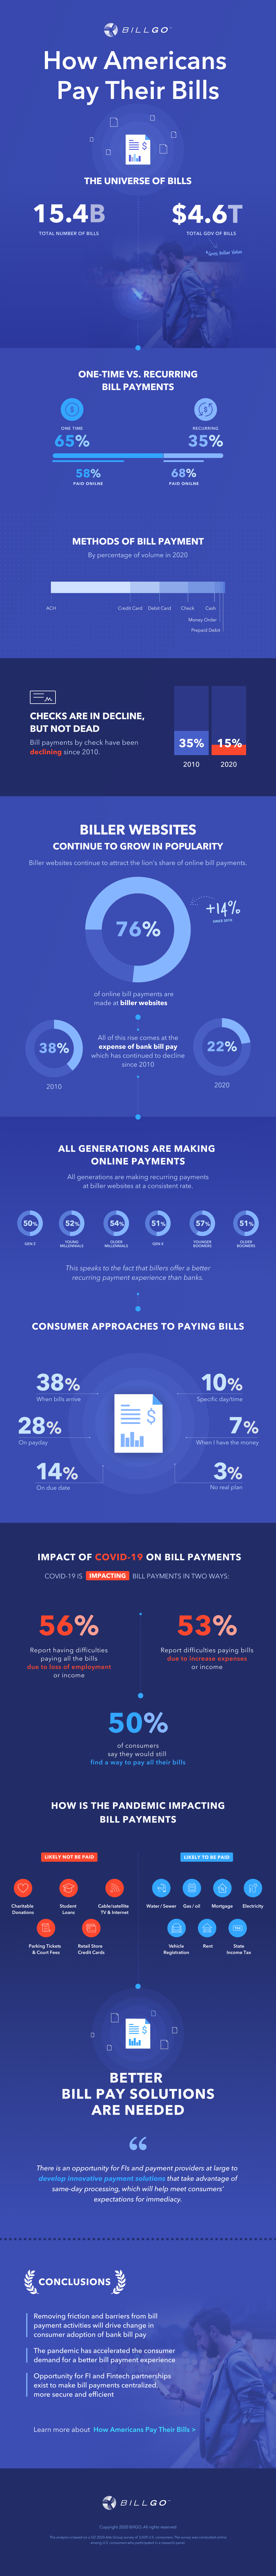 How americans Pay Their Bills (2)